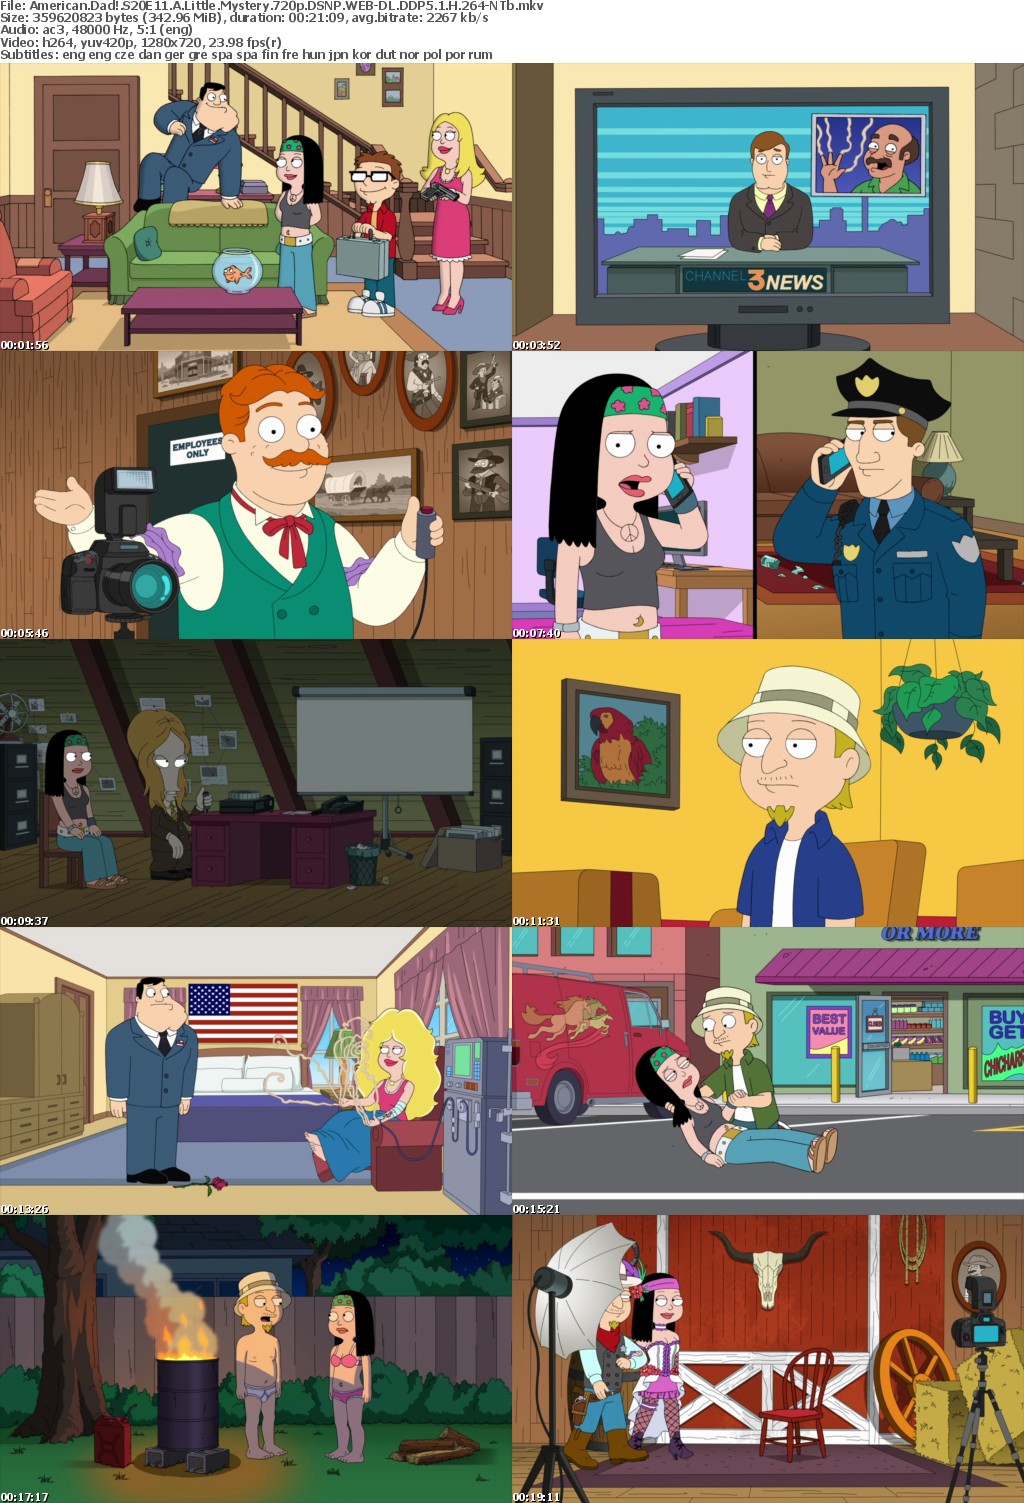 American Dad! S20E11 A Little Mystery 720p DSNP WEB-DL DDP5 1 H 264-NTb